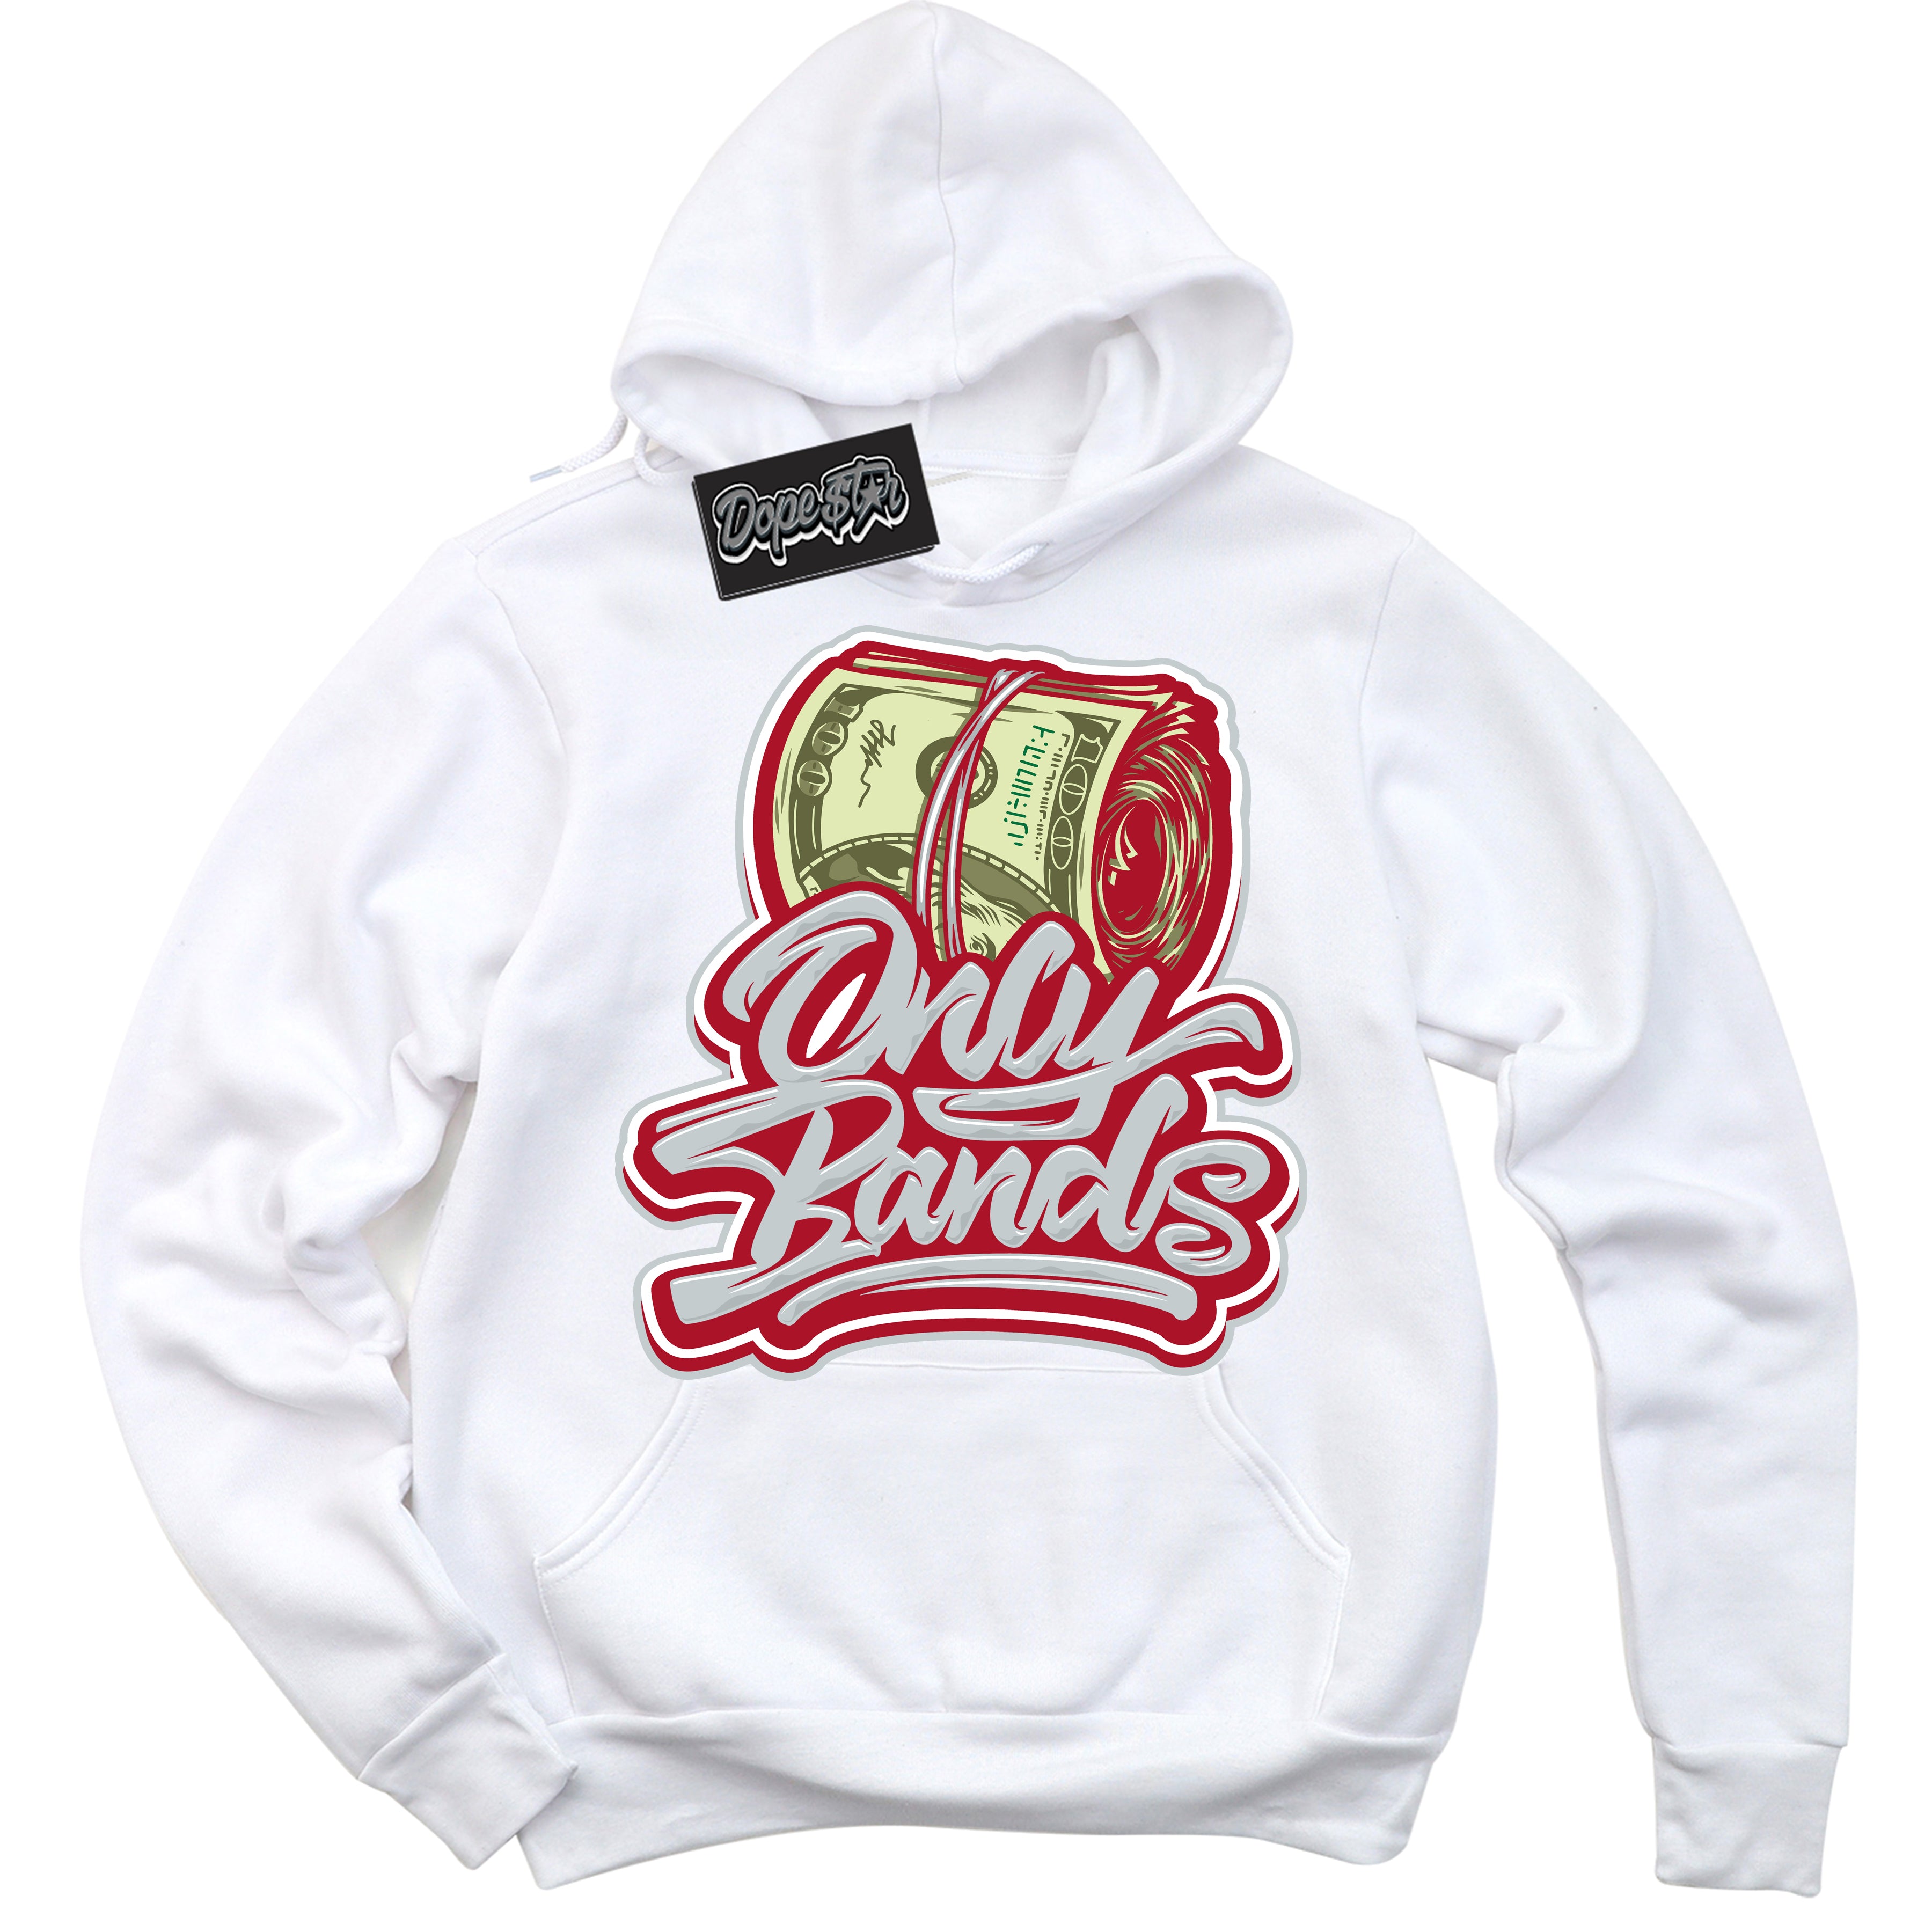 Cool White Hoodie with “ Only Bands ”  design that Perfectly Matches  Reverse Ultraman Sneakers.